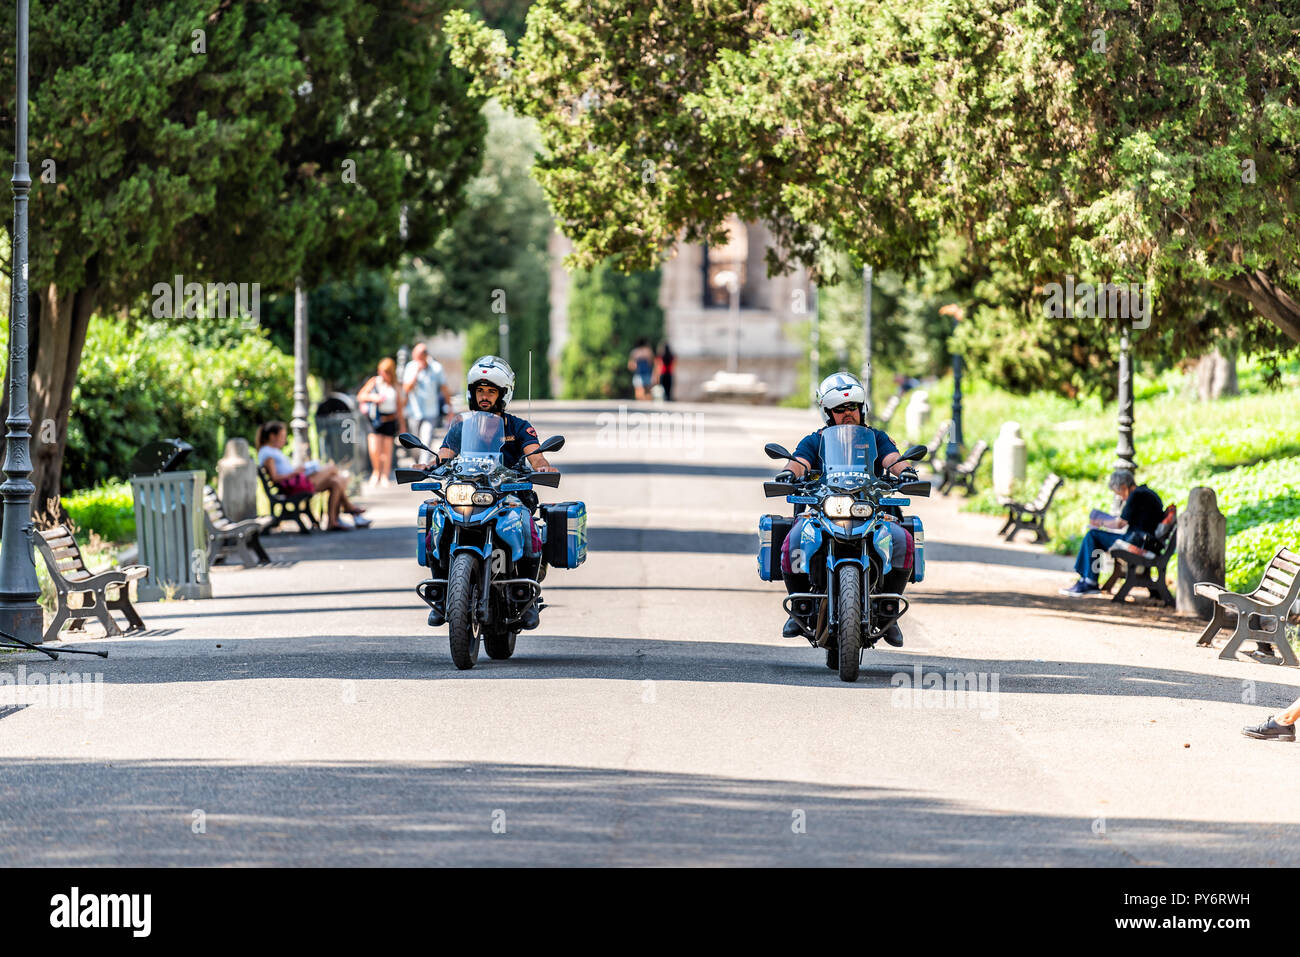 Rome, Italy - September 4, 2018: Historic green city park on Via della Domus Aurea street with security police officers on motorcycles emergency drivi Stock Photo